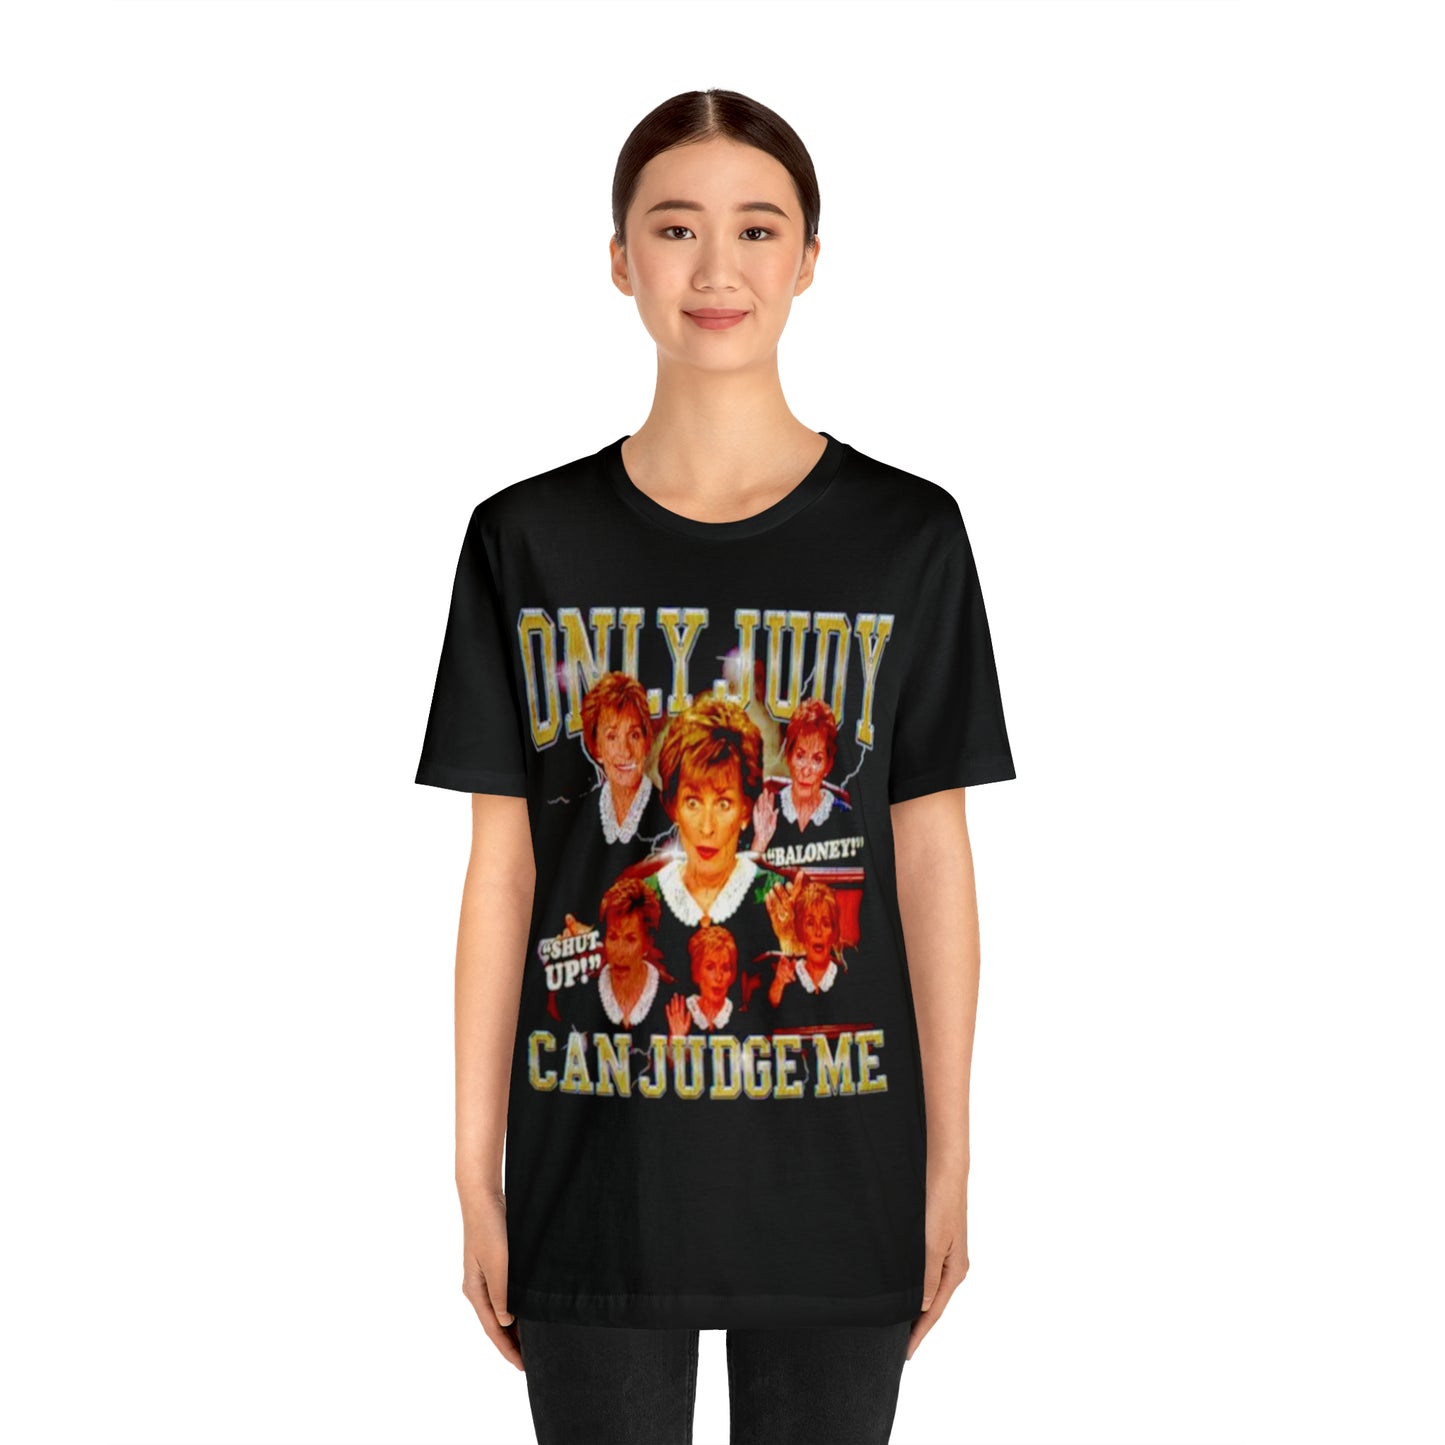 Only Judy Can Judge Me! Unisex Jersey Short Sleeve Tee